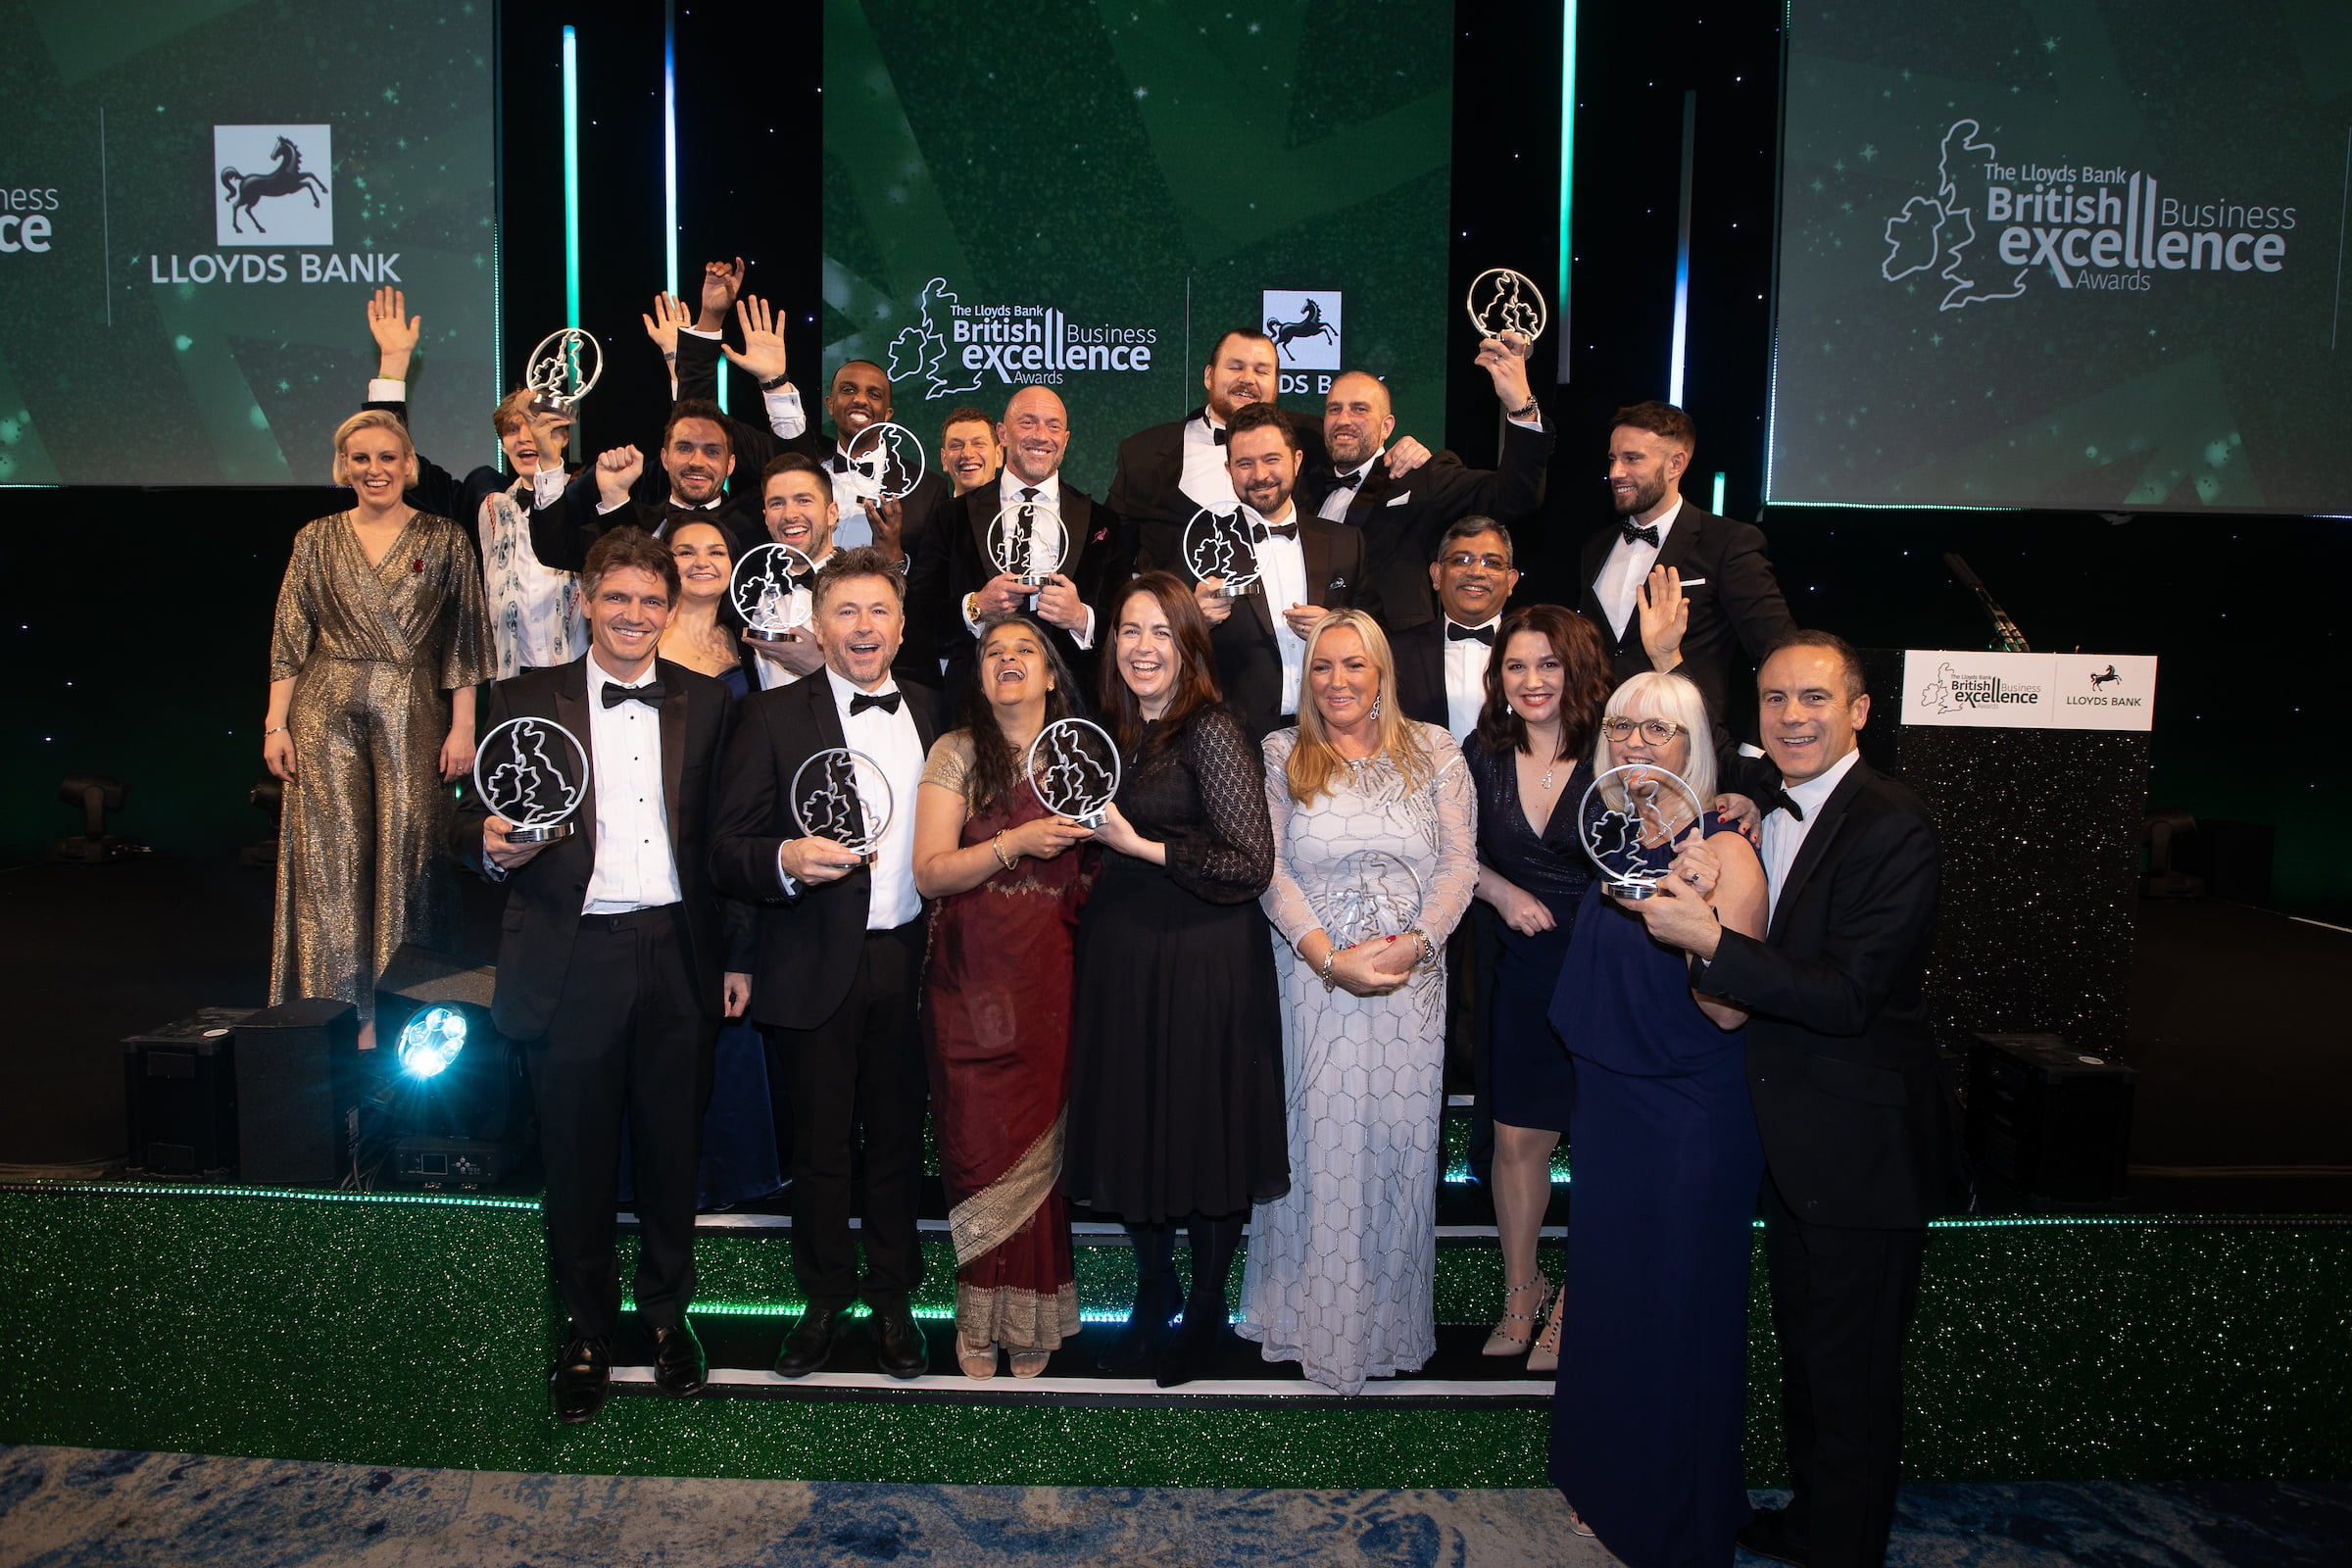 British Business Excellence Awards 2021 group photo